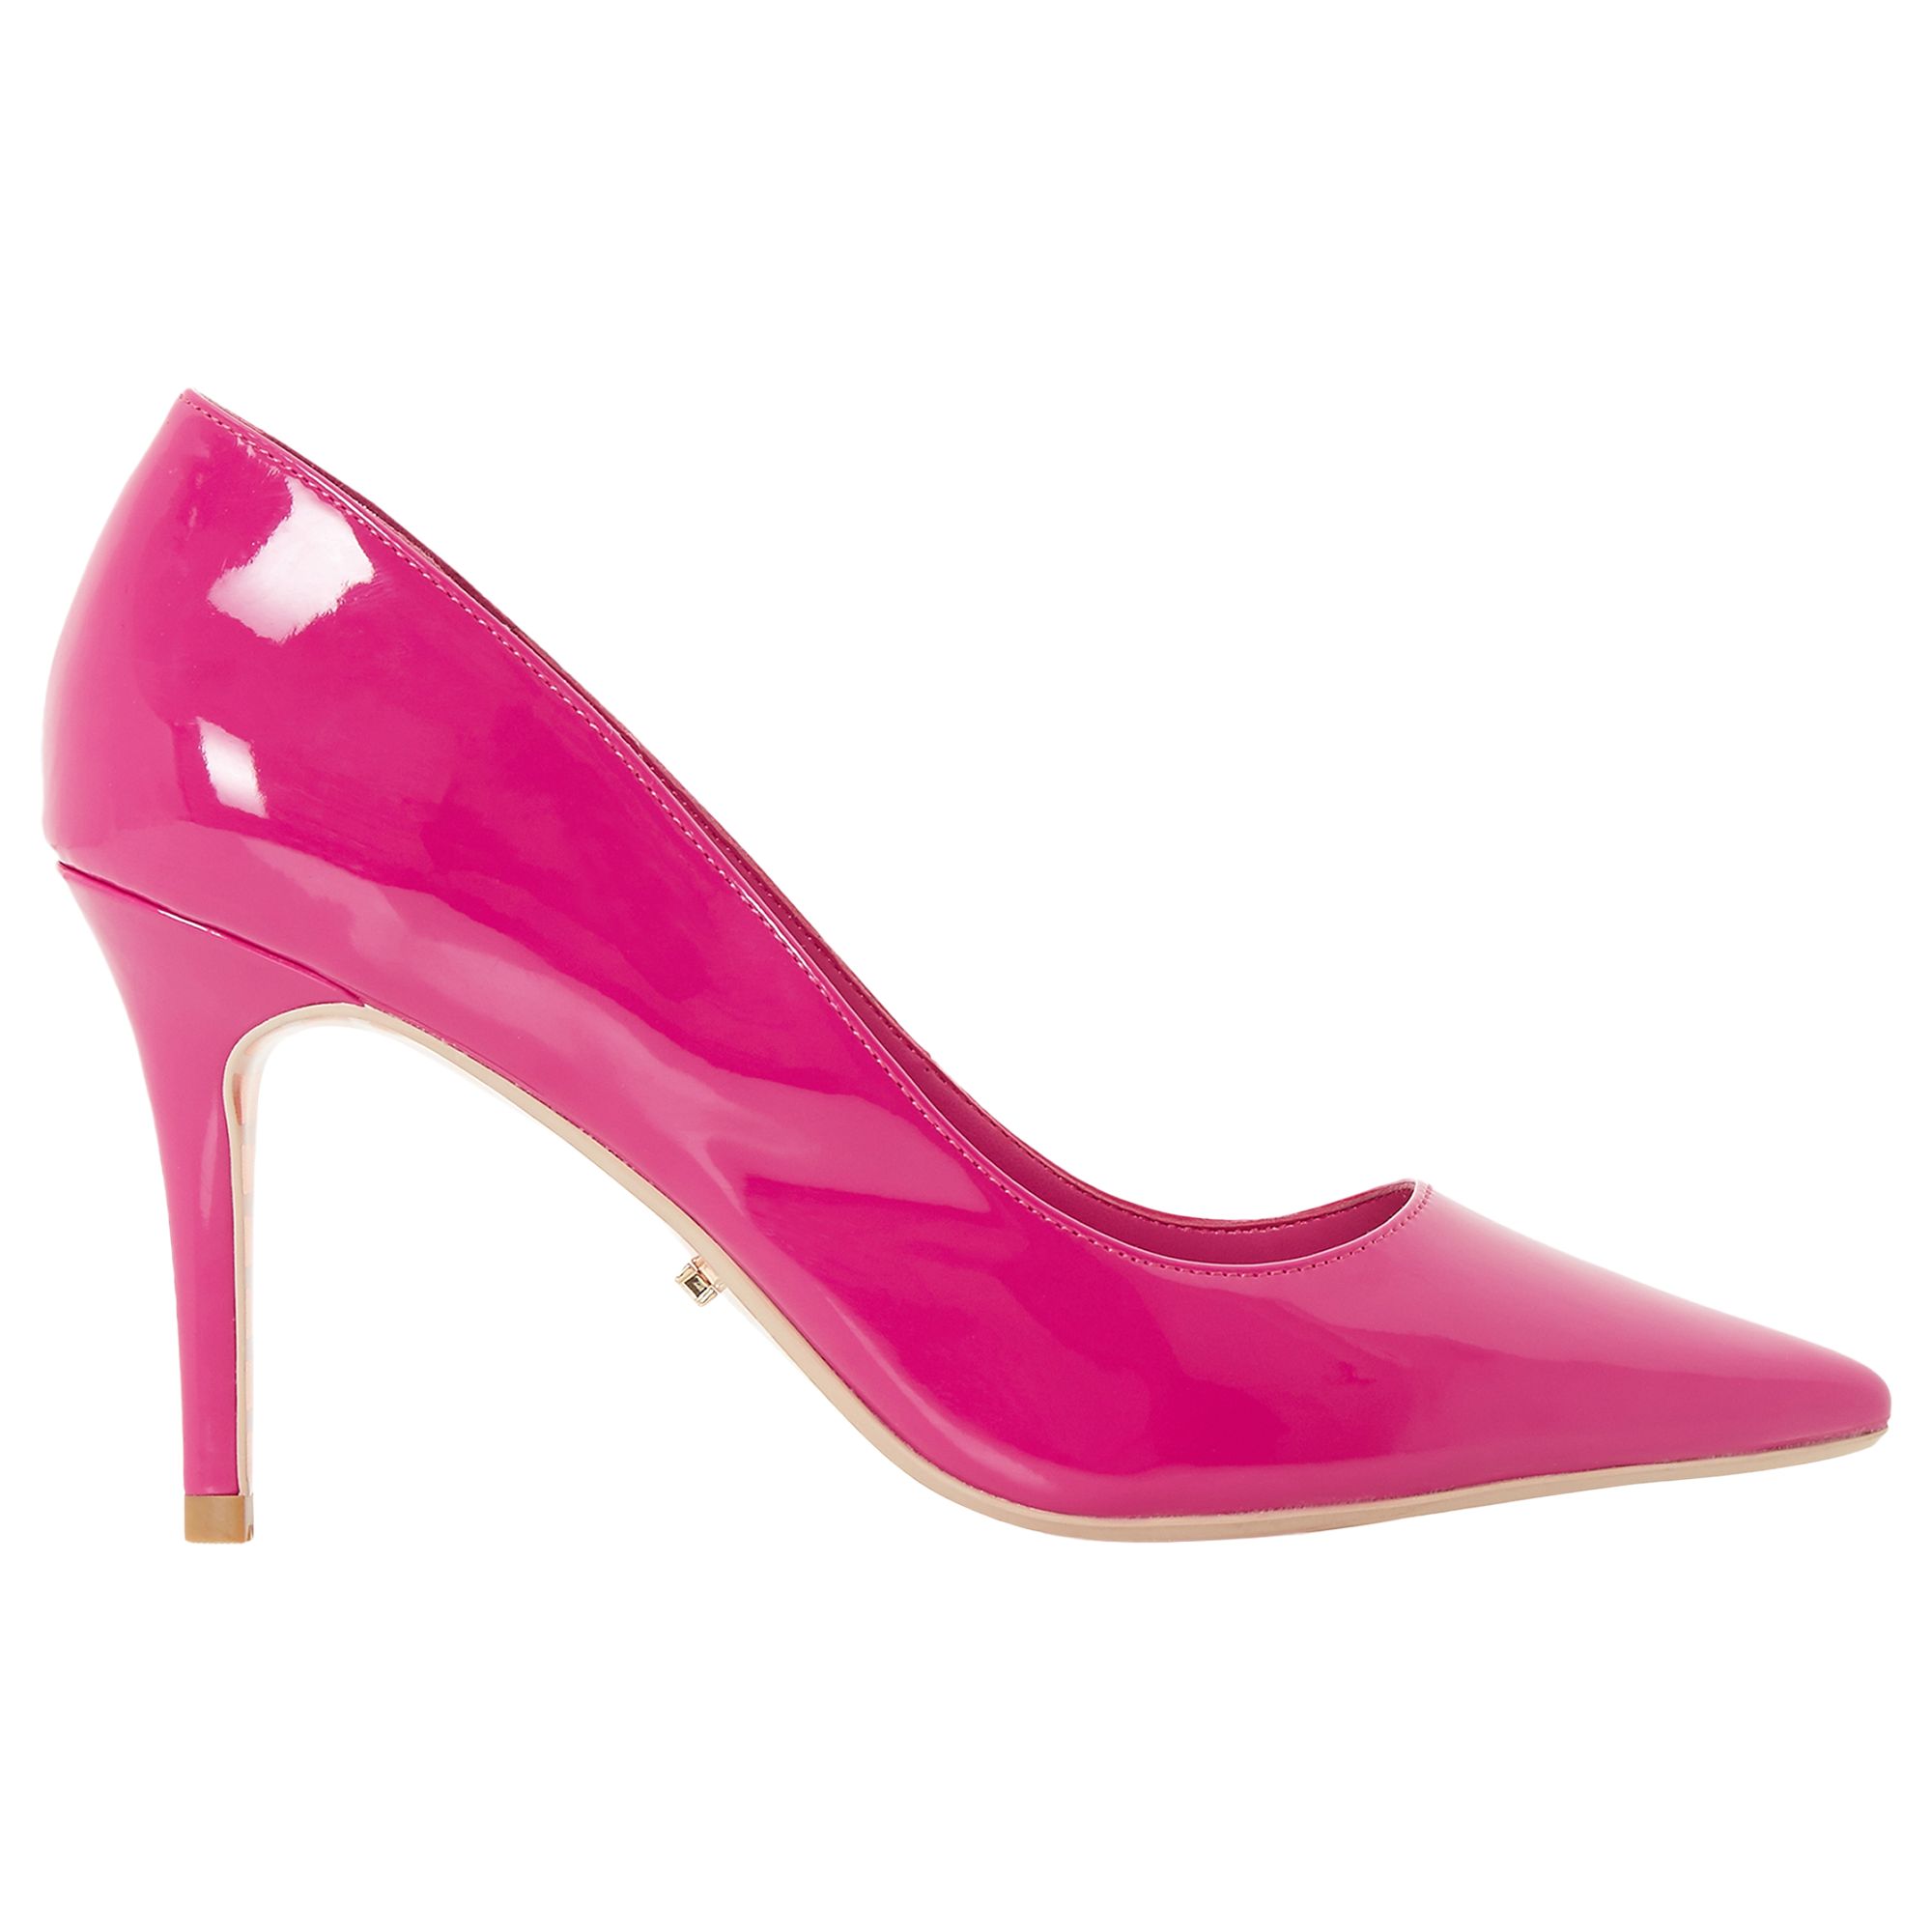 Dune Aurrora Pointed Toe Court Shoes, Pink, 6